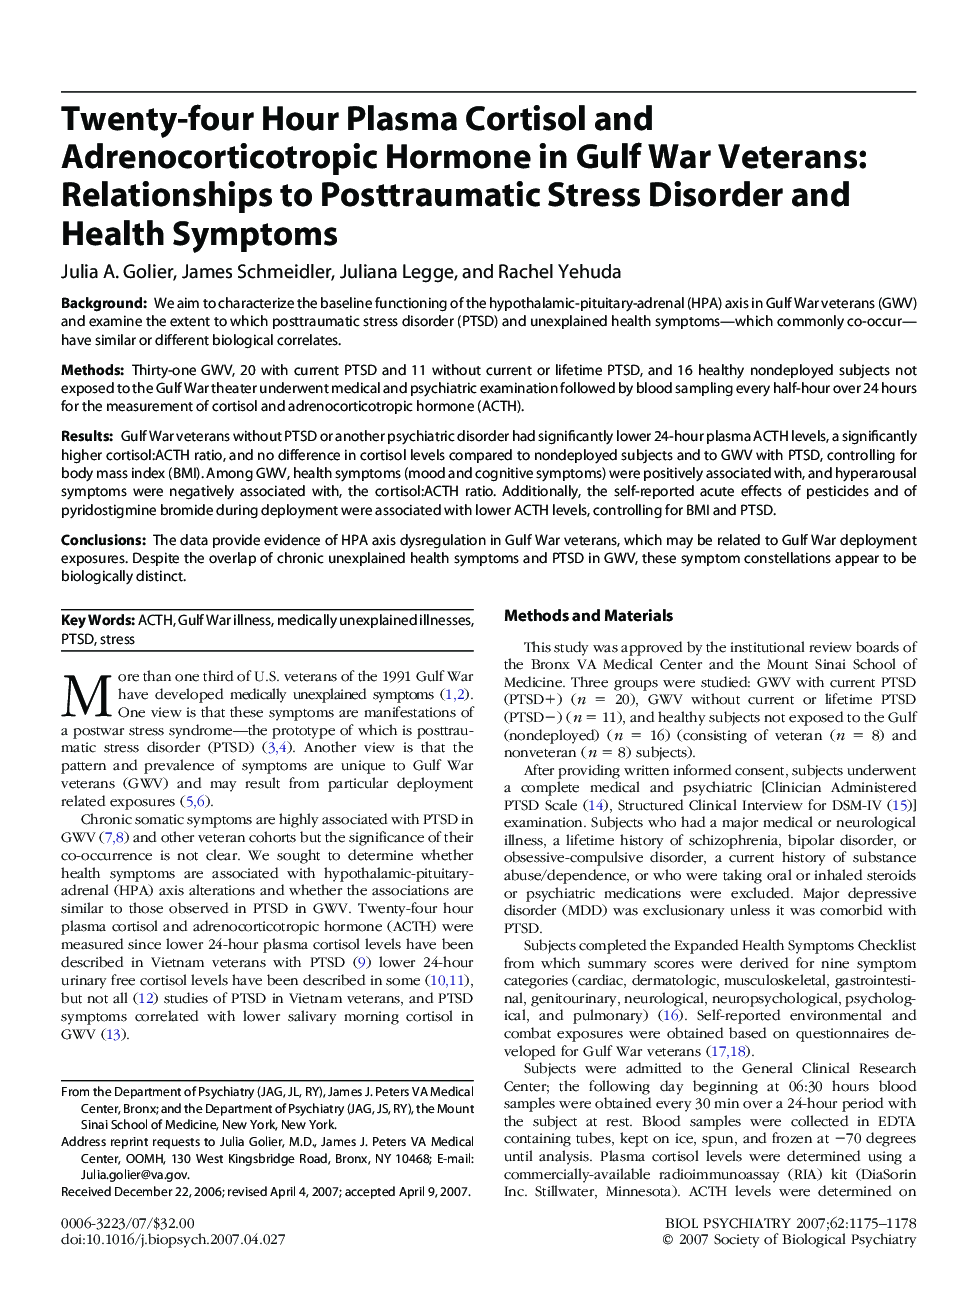 Twenty-four Hour Plasma Cortisol and Adrenocorticotropic Hormone in Gulf War Veterans: Relationships to Posttraumatic Stress Disorder and Health Symptoms